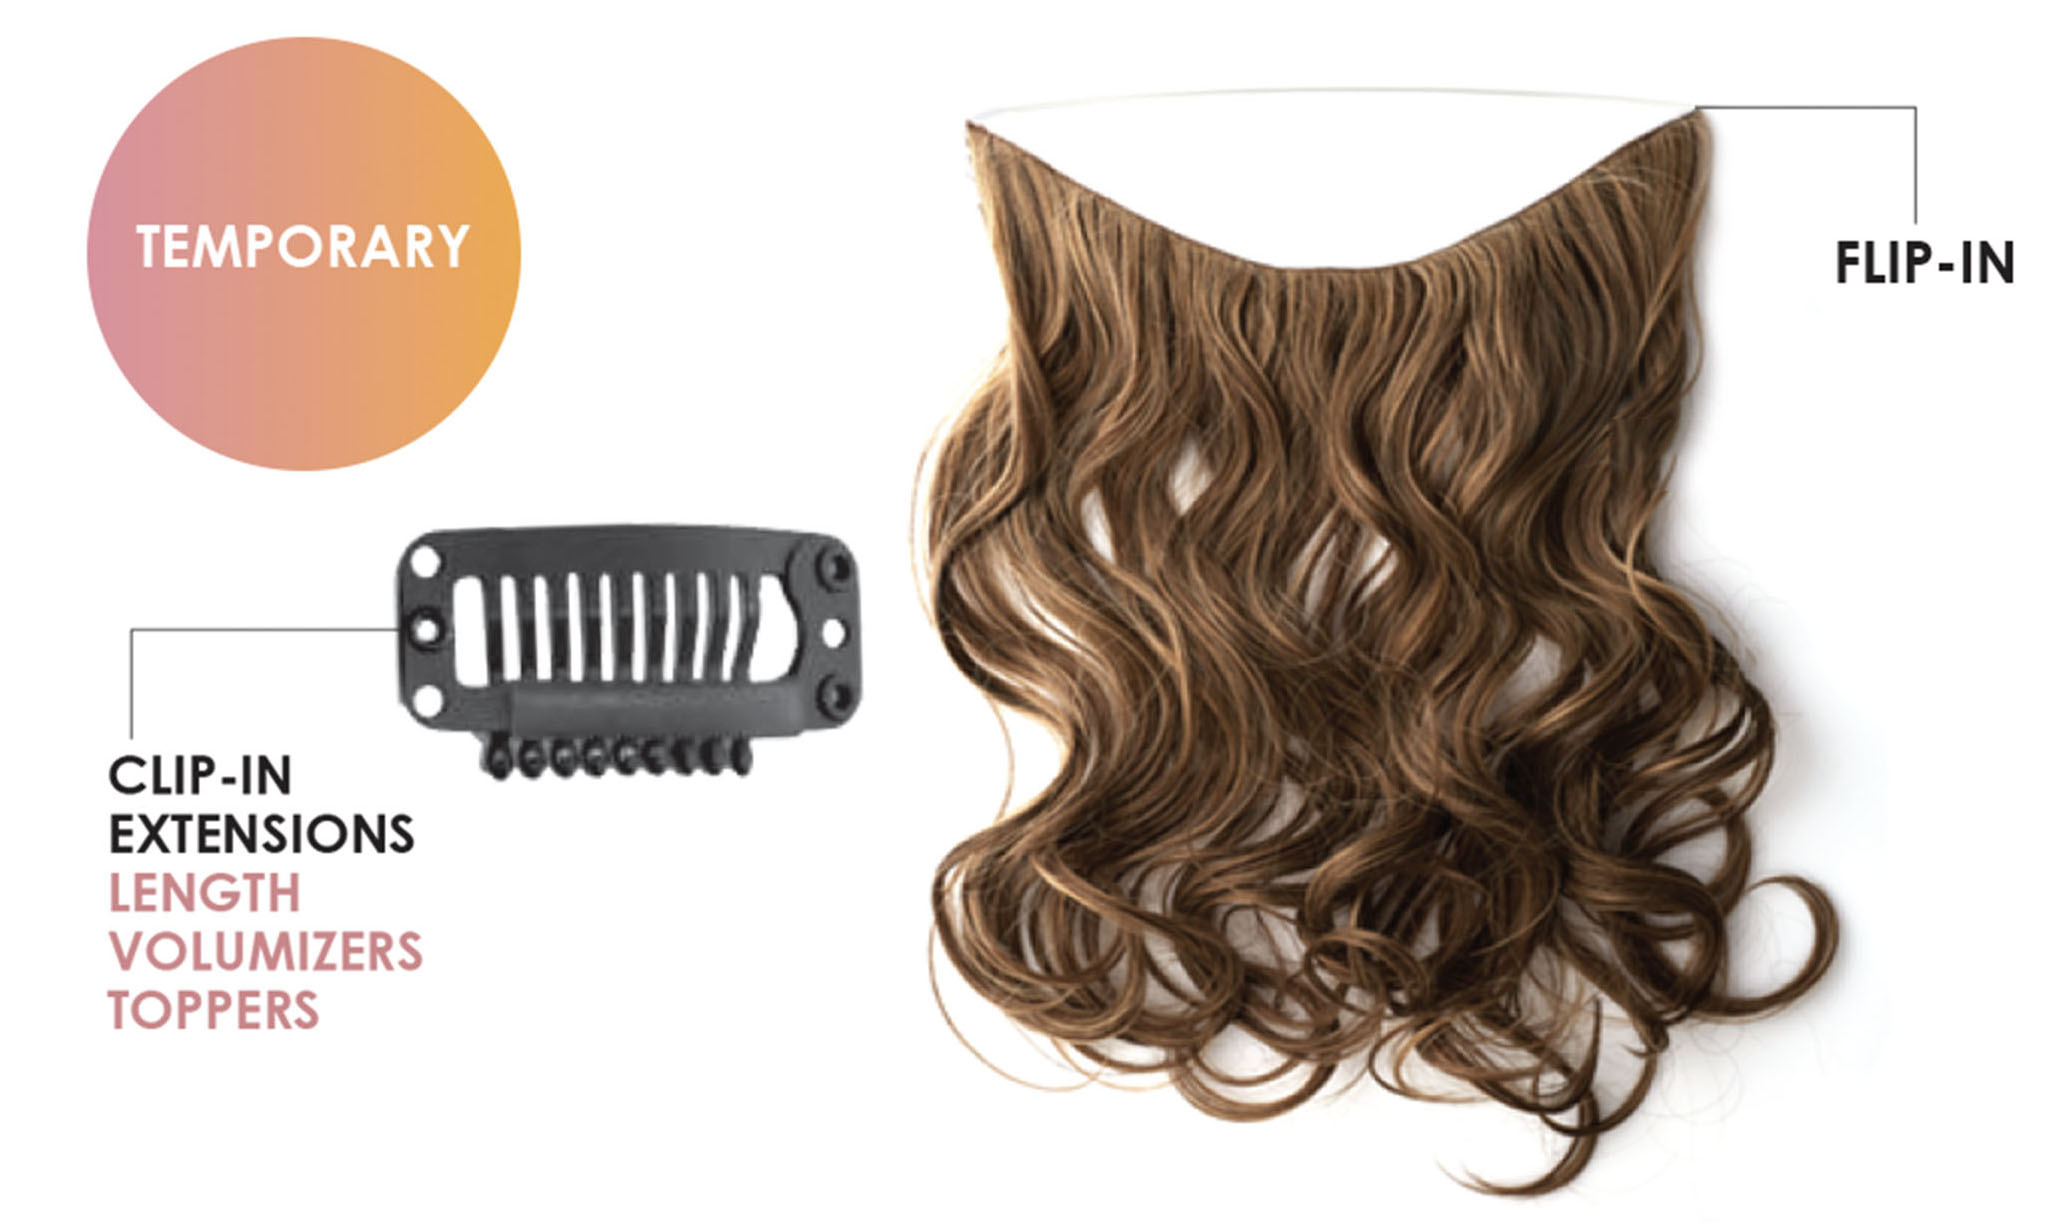 Hair Extension Methods - Best Hair Extensions Pros and Cons | HEM